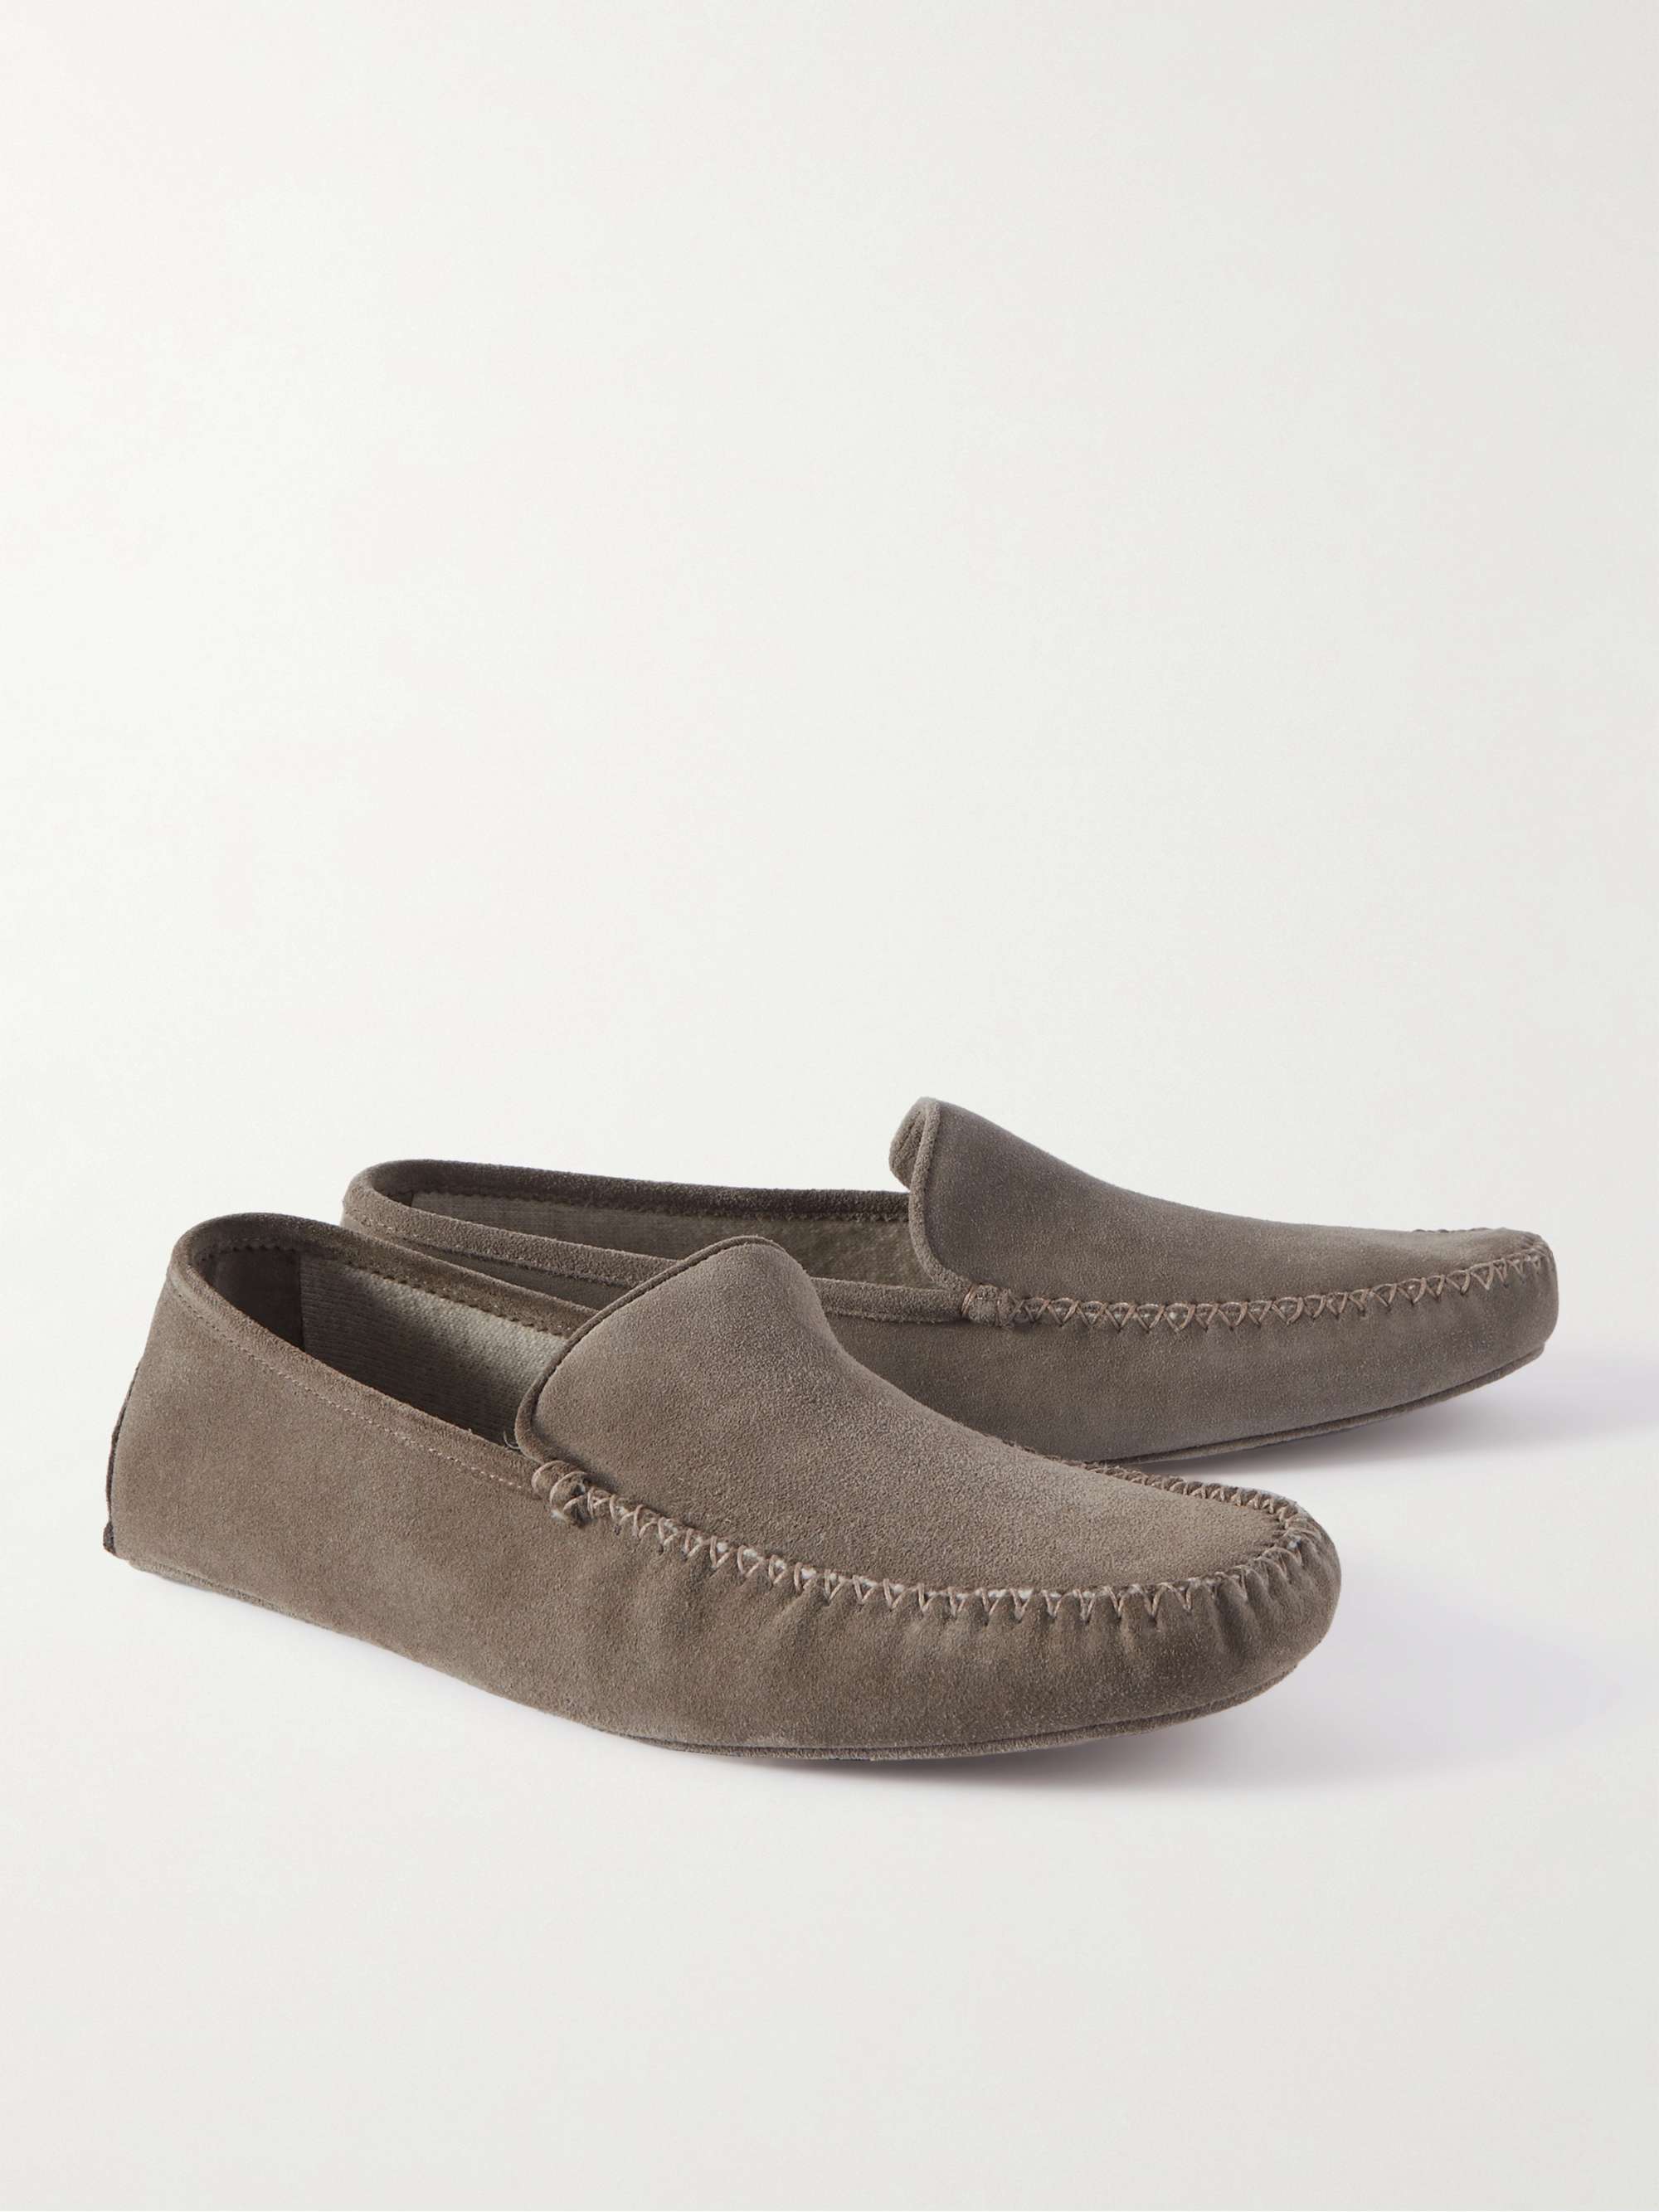 THOM SWEENEY Cashmere-Lined Suede Slippers